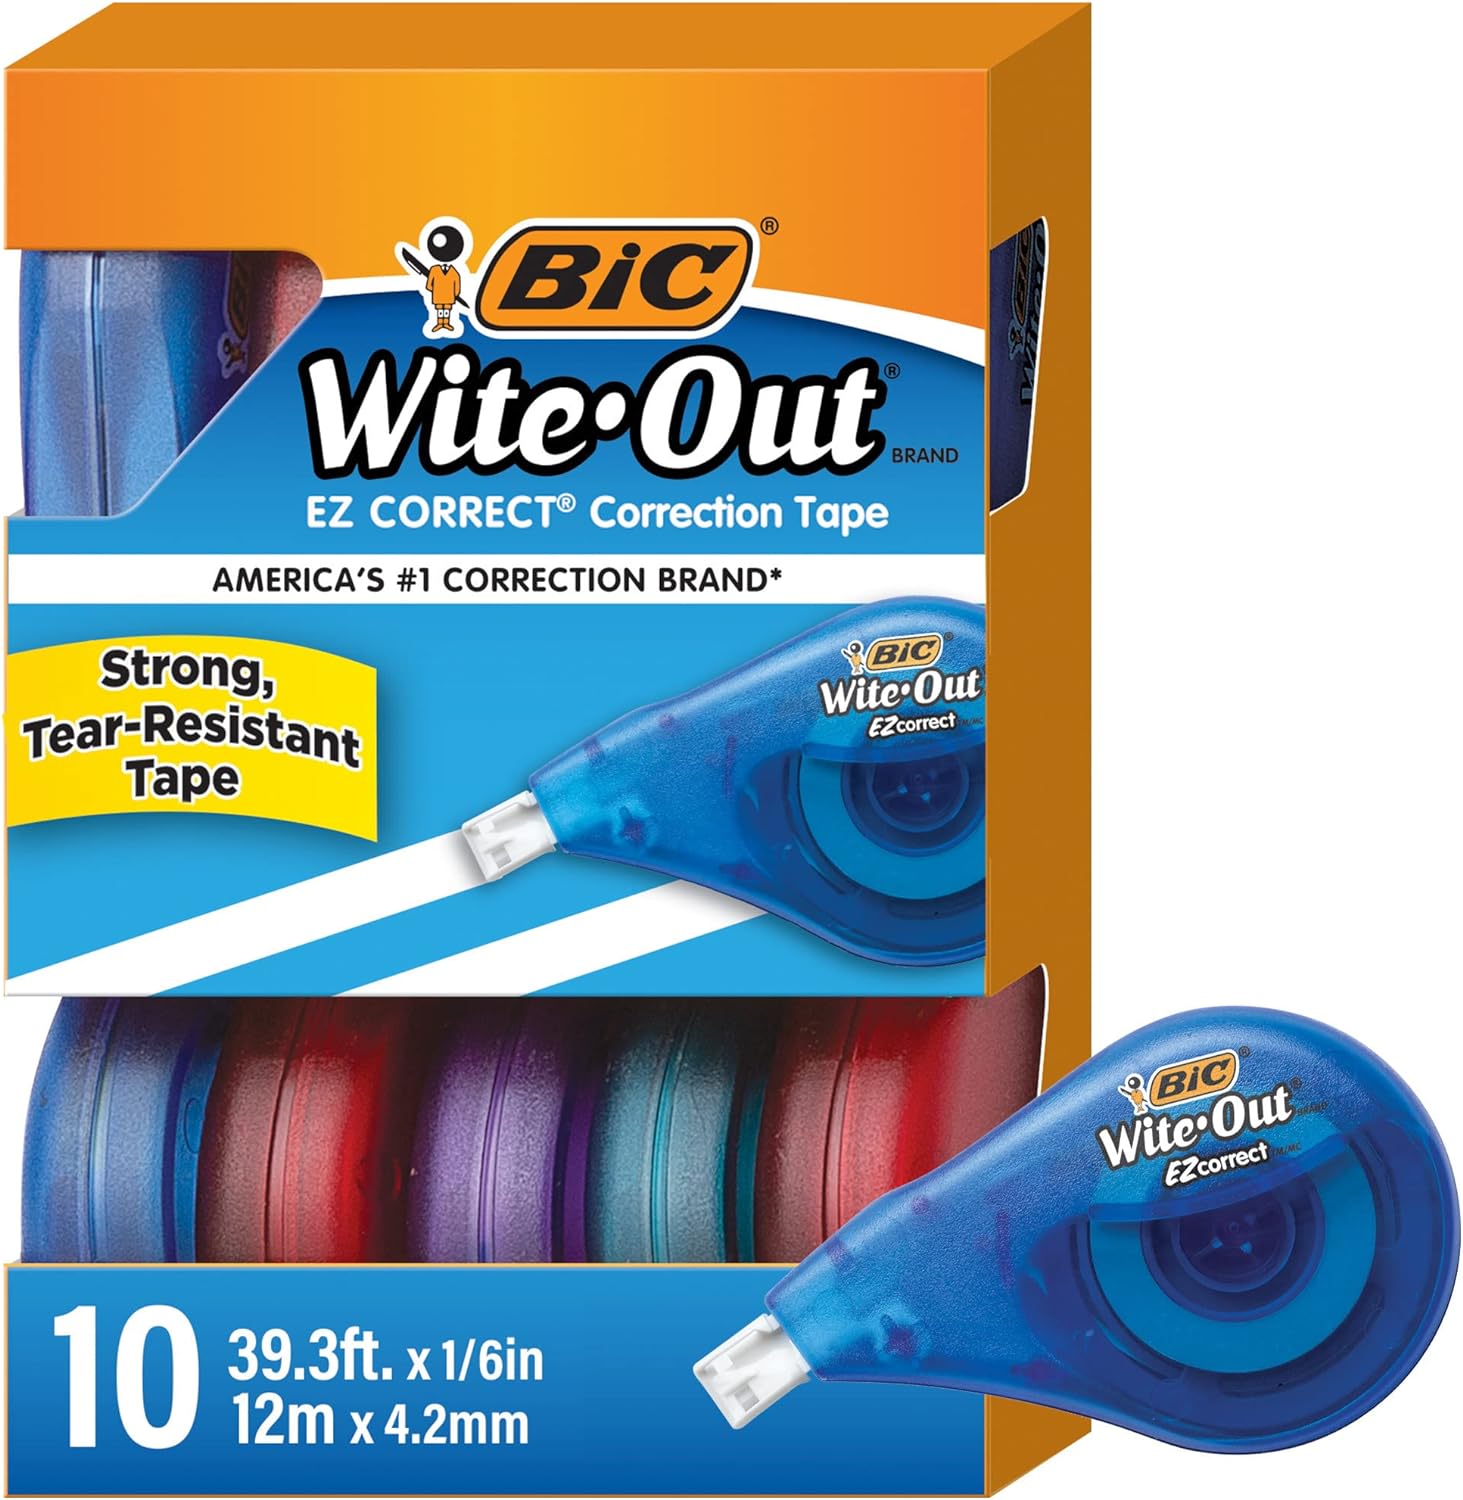 BIC Wite-Out Brand EZ Correct Correction Tape, White, (Pack of 9, 90 Count Total)